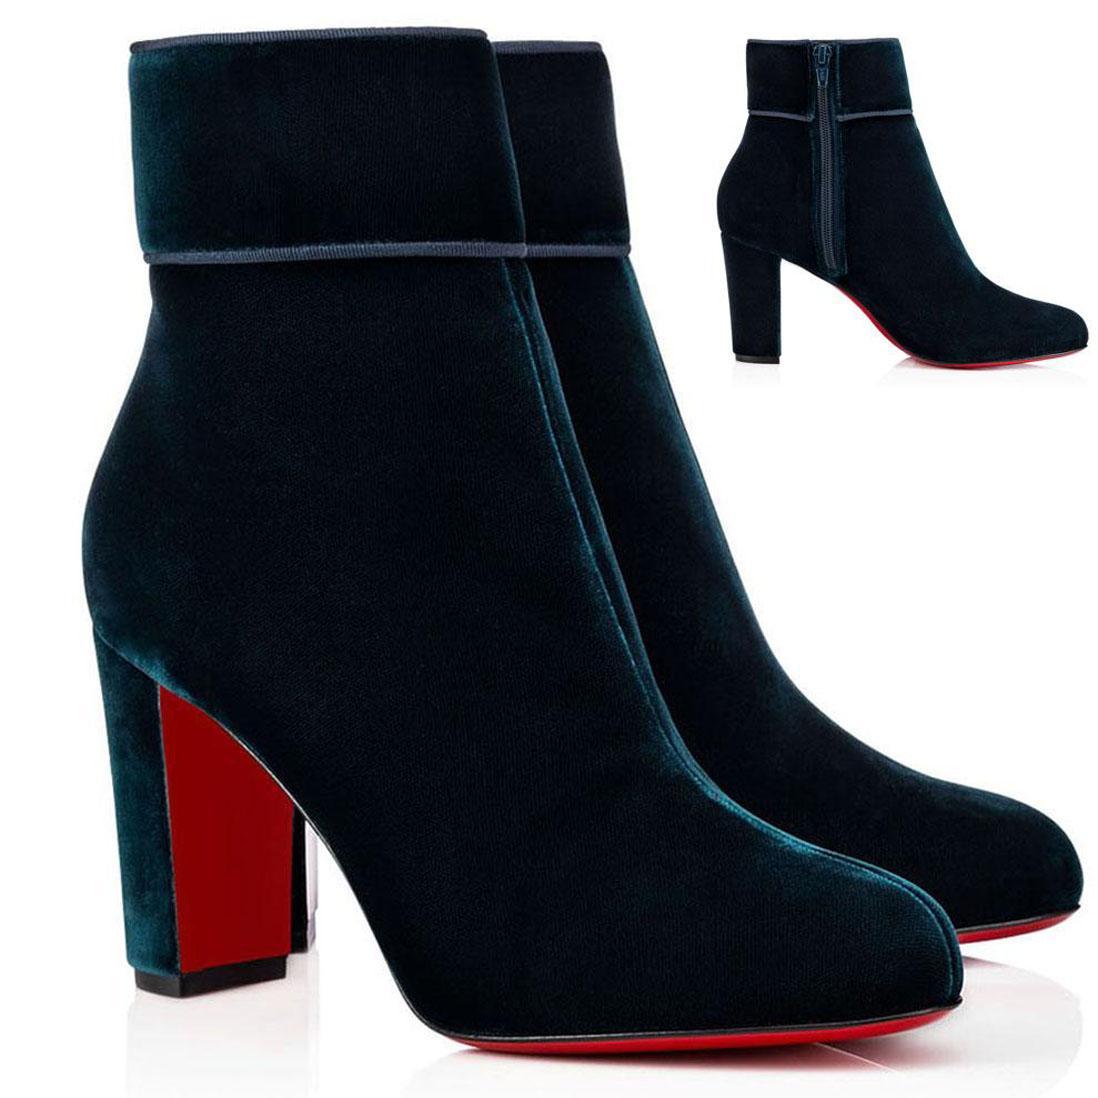 

2021 Top Designers Chunky Heels Women's Red Bottom Ankle Boots Booty Black Suede Leather Reds Soles Booties Genuine Leathers With Box